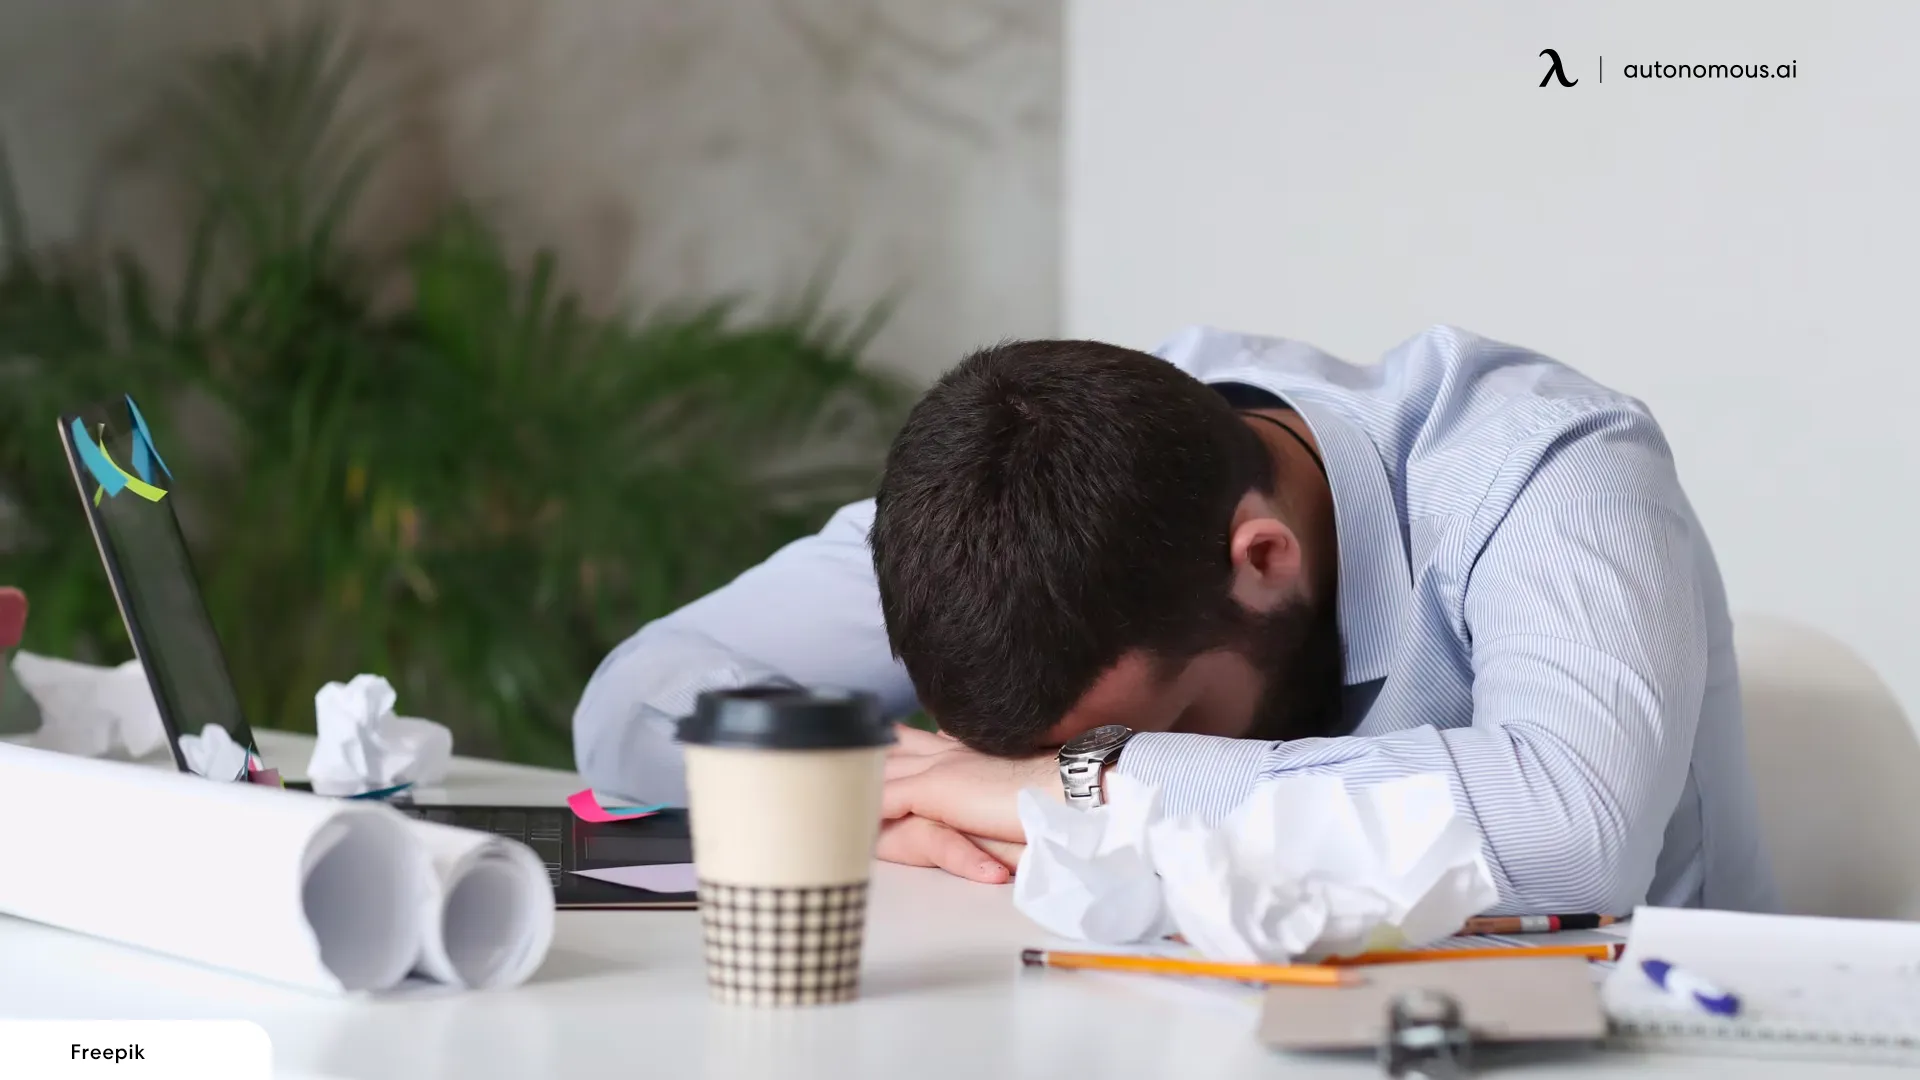 What Is an “Afternoon Slump”?